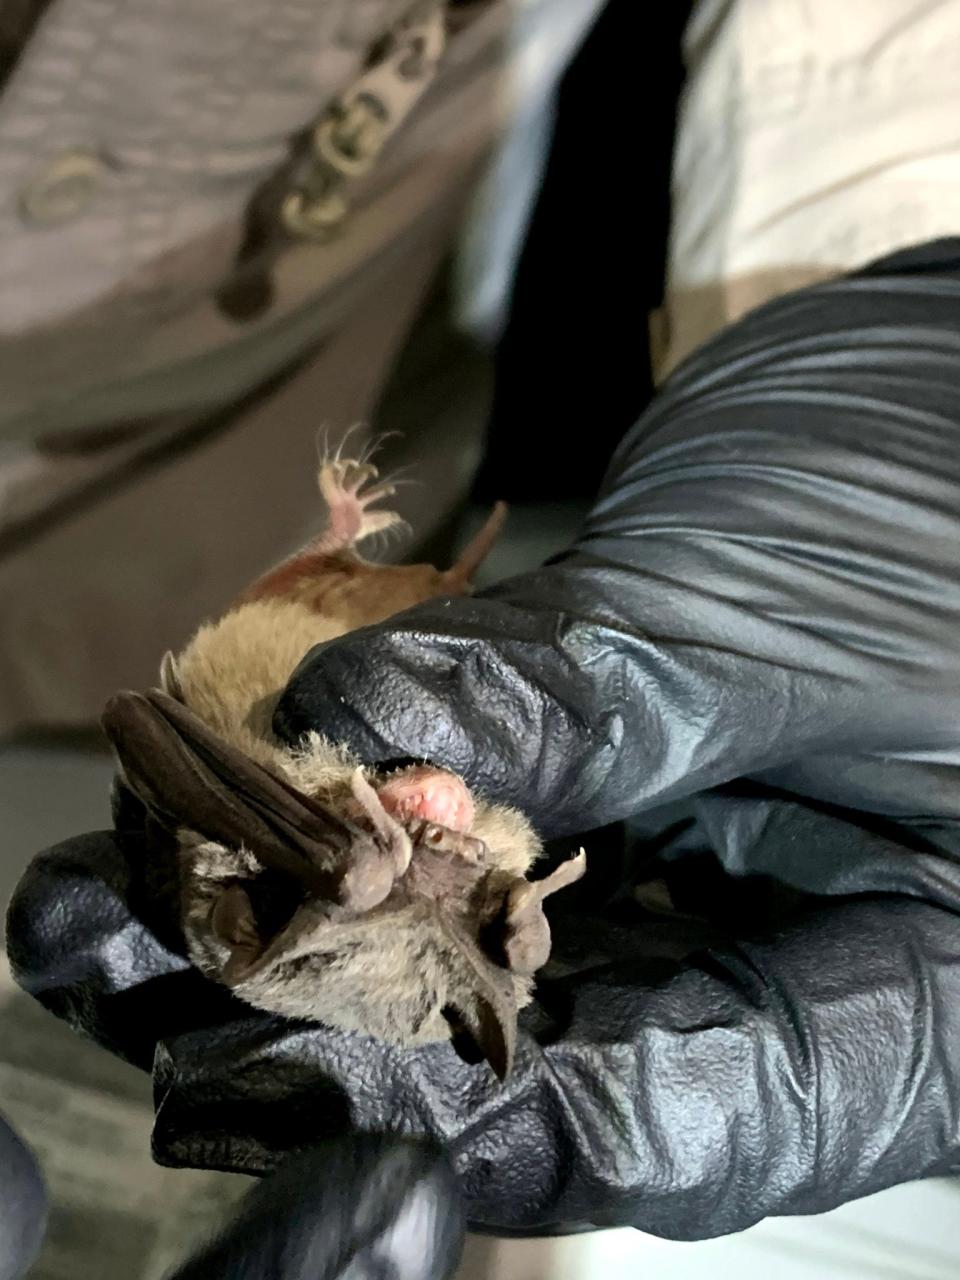 Various bat species, including Brazilian free-tailed bats, can be found in Utah.